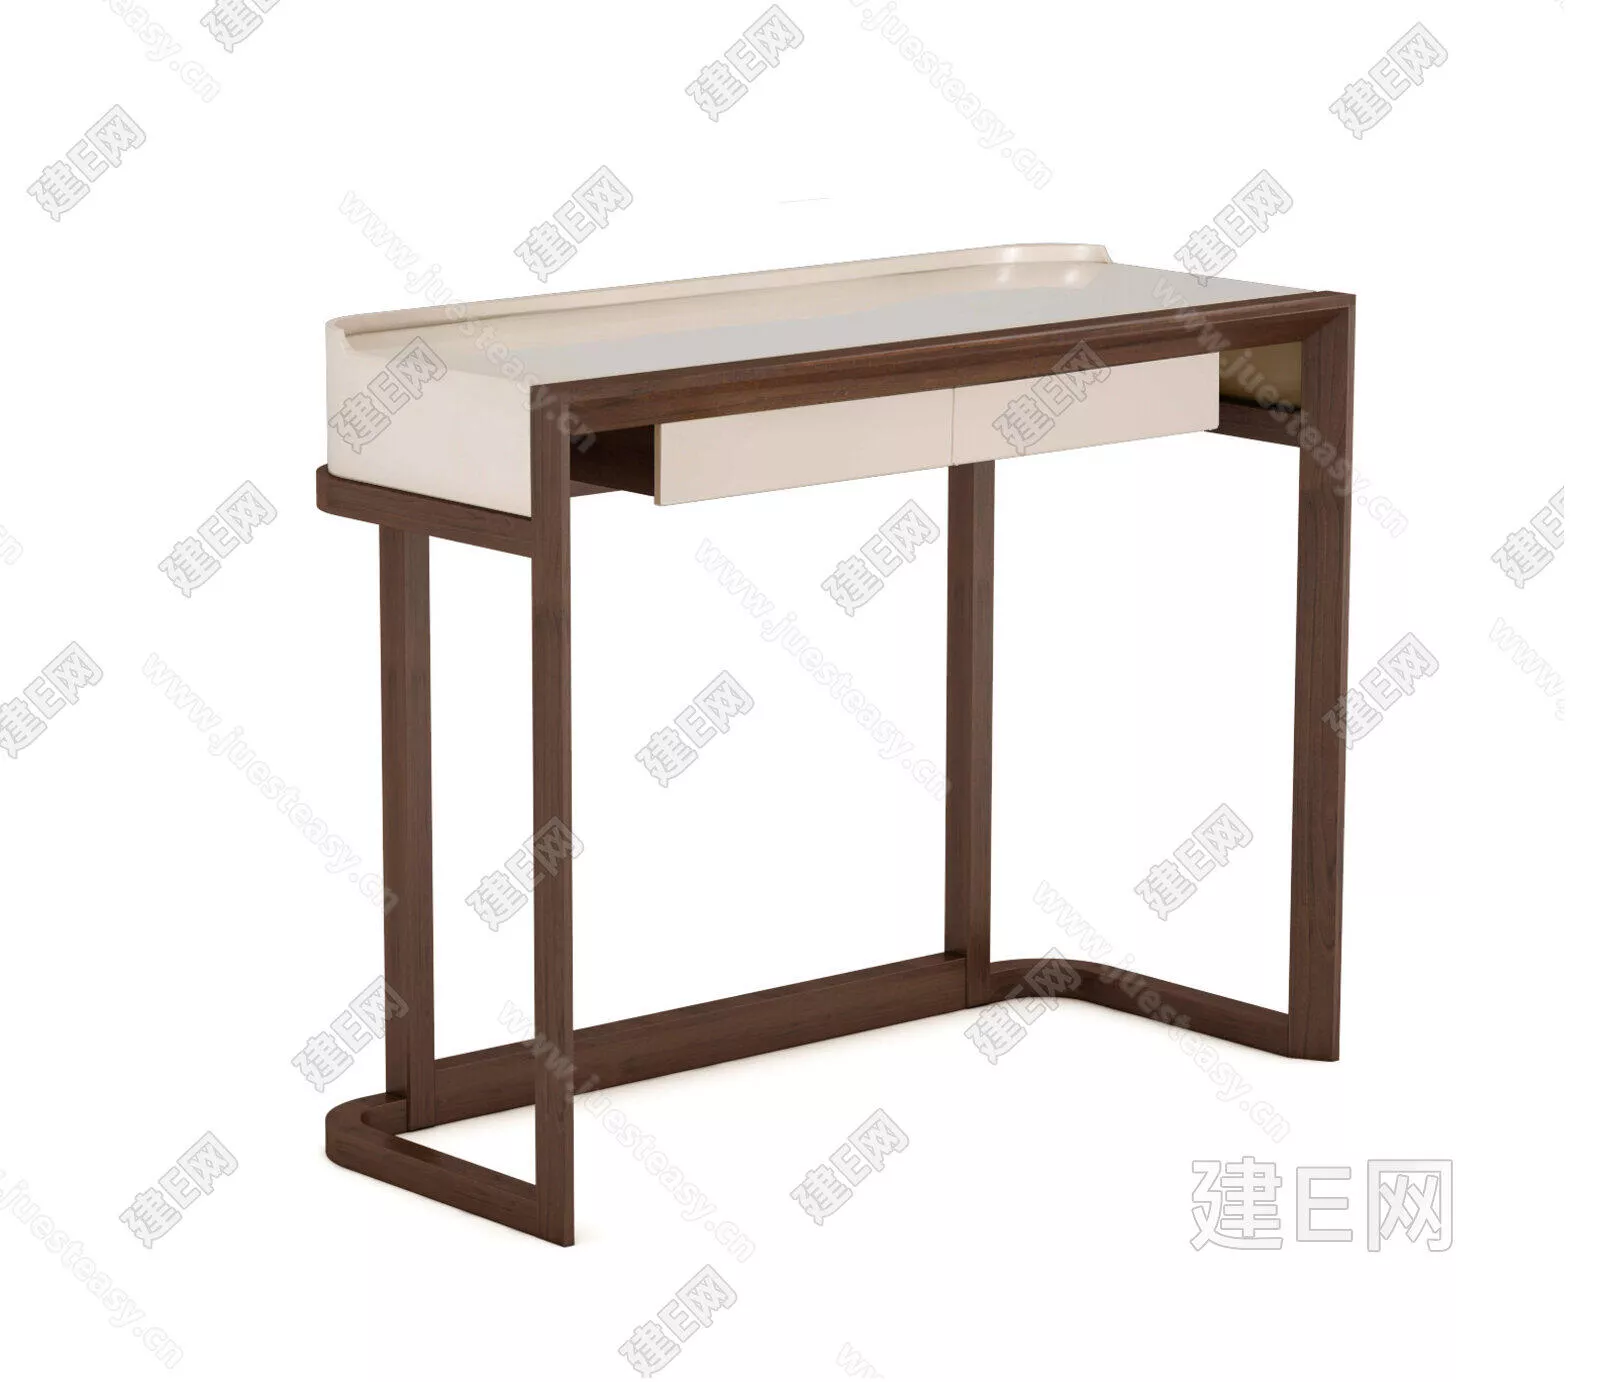 CHINESE DINING TABLE SET - SKETCHUP 3D MODEL - ENSCAPE - 111889843